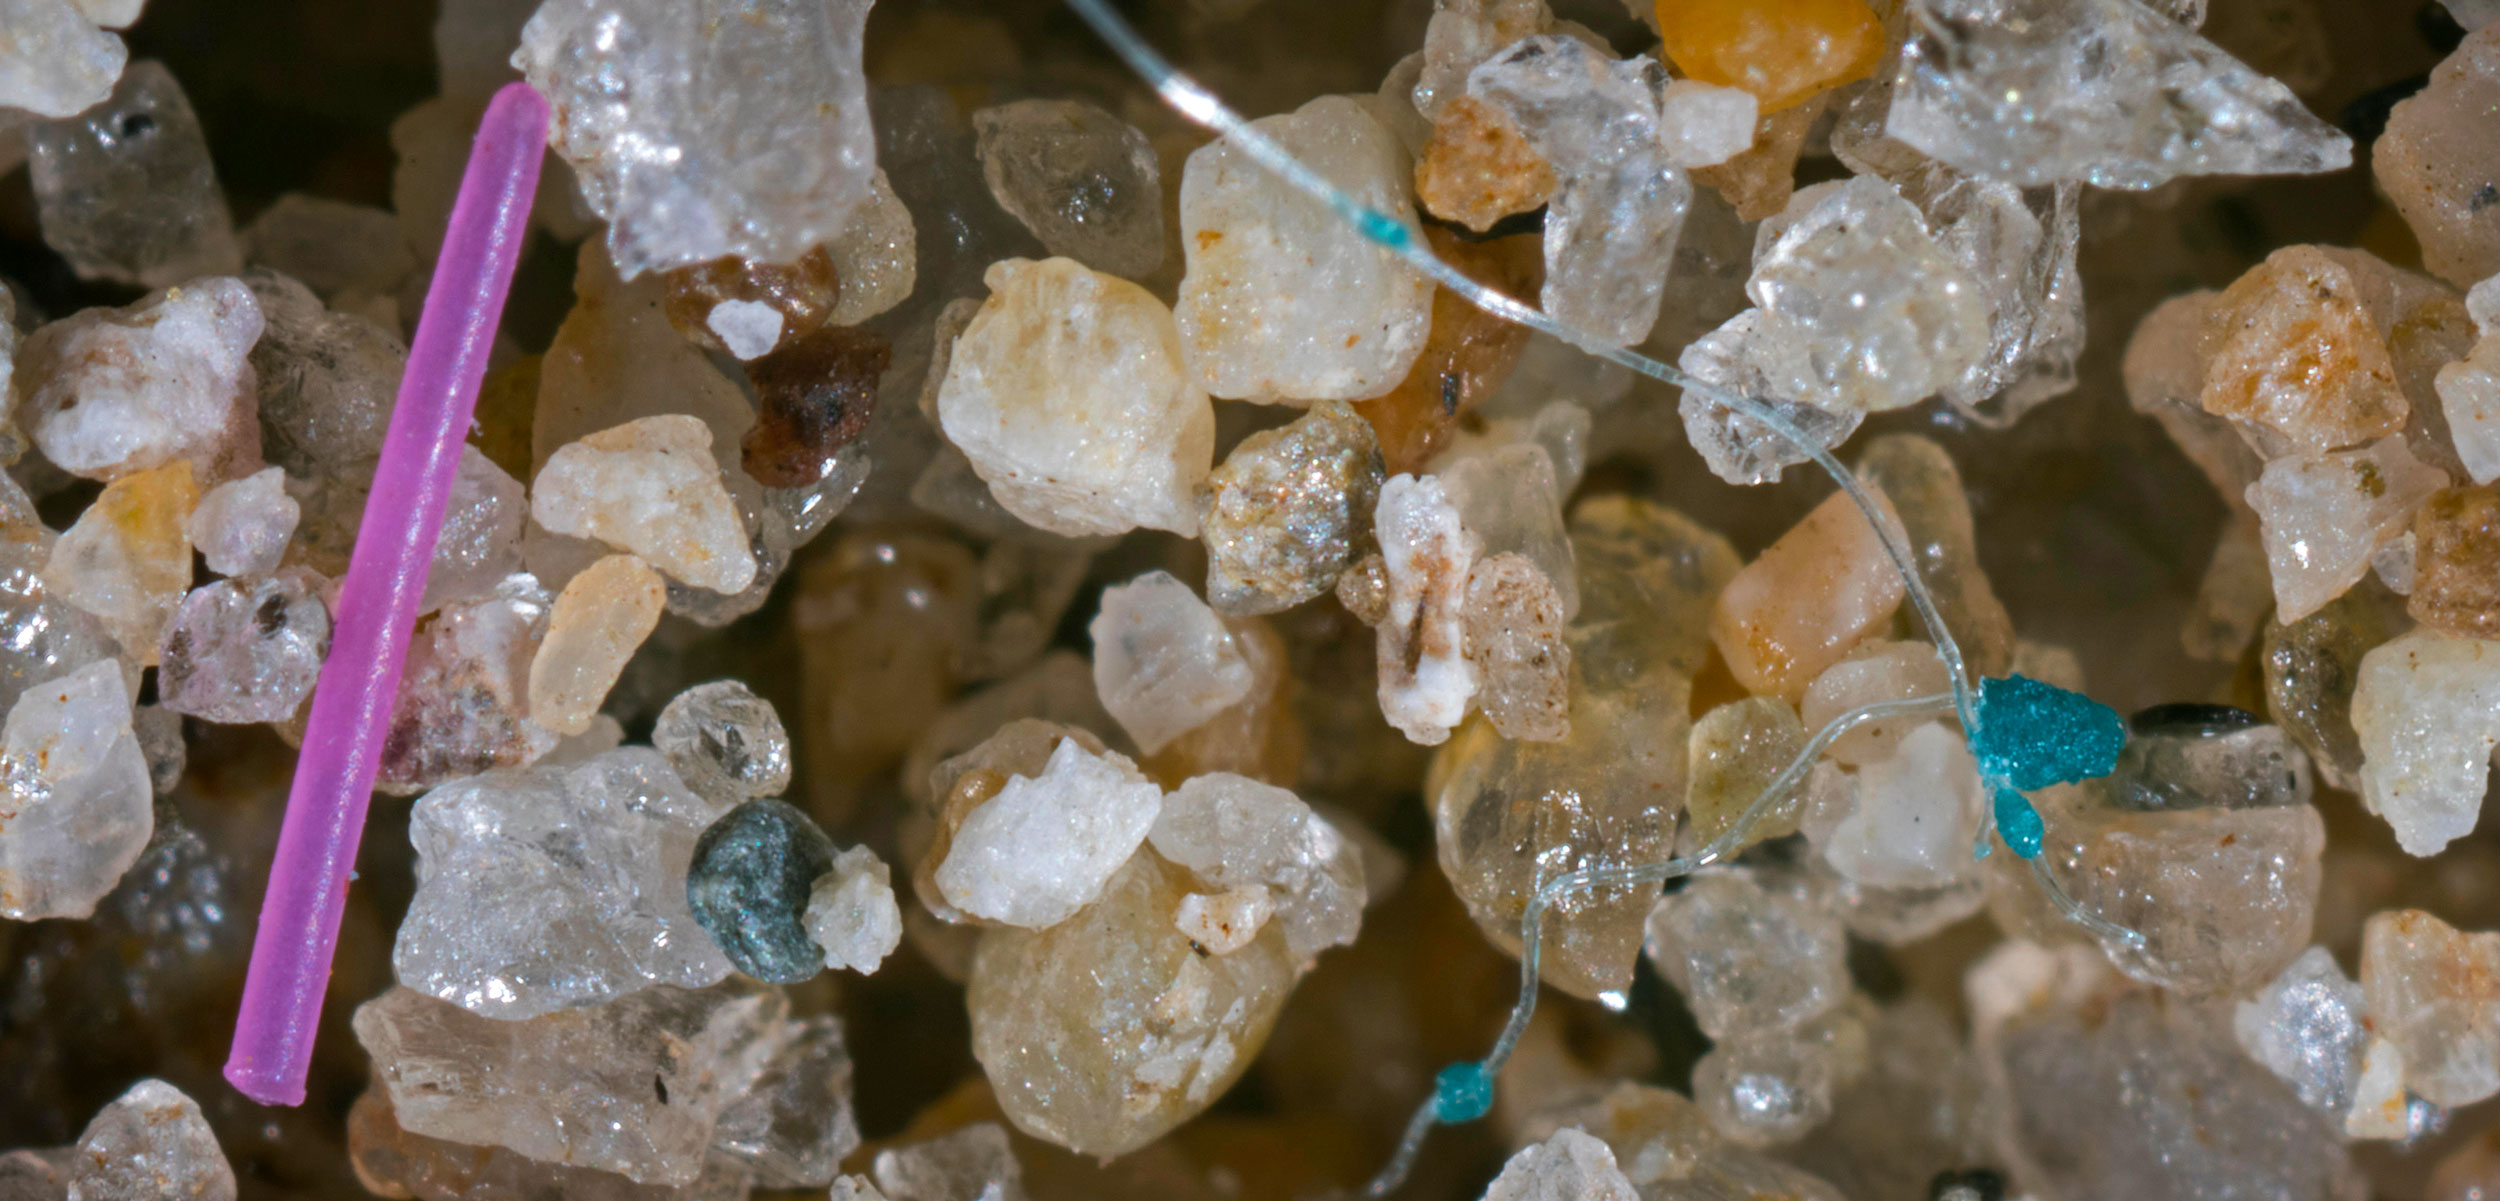 Microplastics Are Highly Diverse and Those Differences Matter